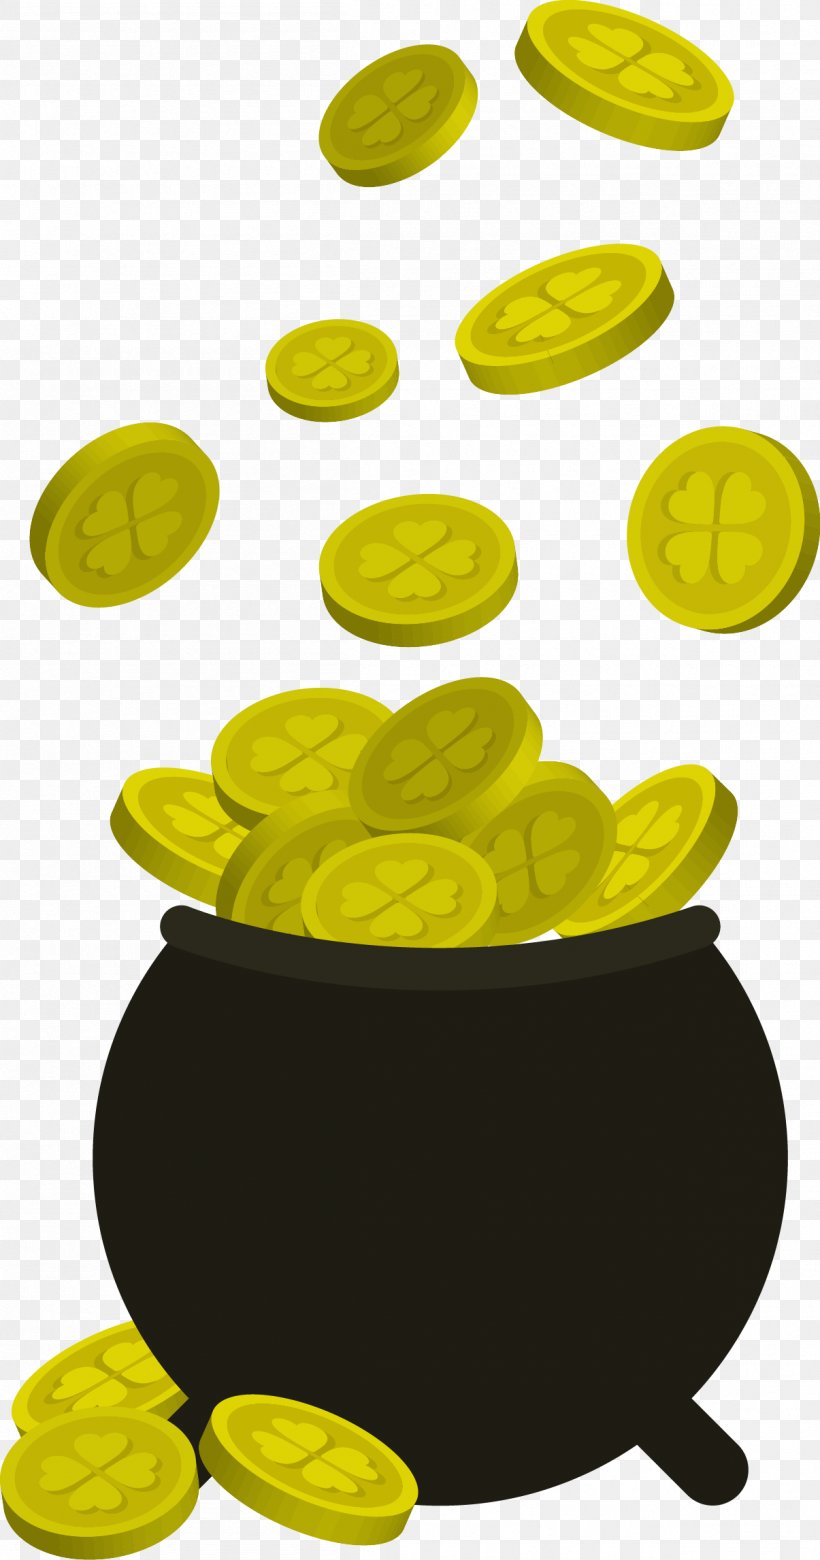 Gold Coin, PNG, 1205x2293px, Gold Coin, Coin, Food, Fruit, Gold Download Free